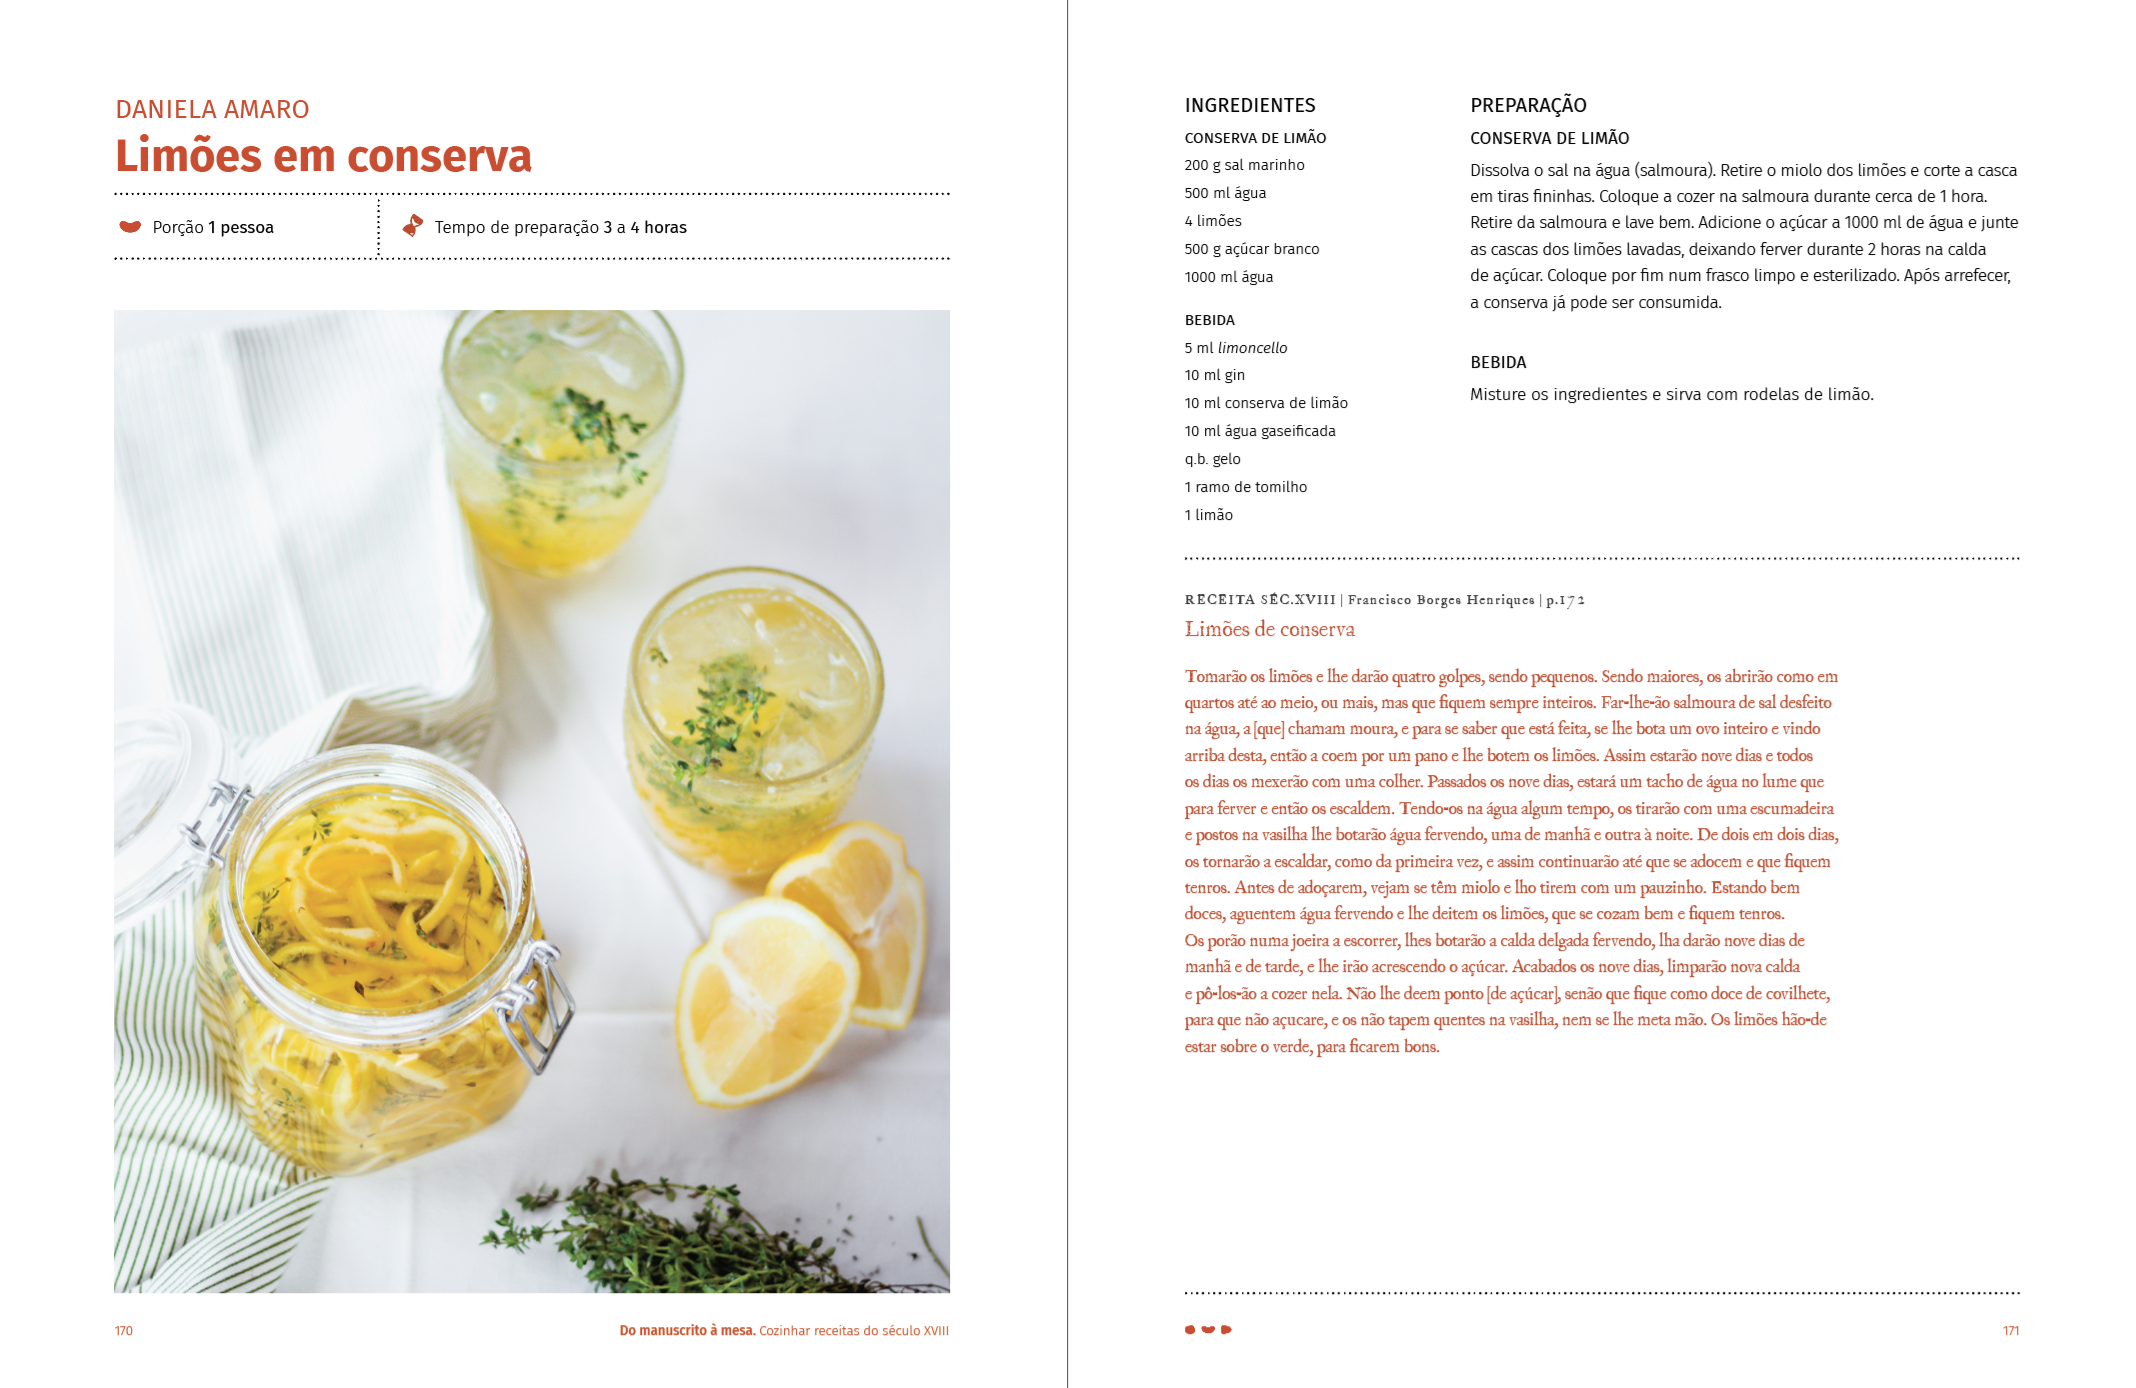 One page of the e-book with recipes.